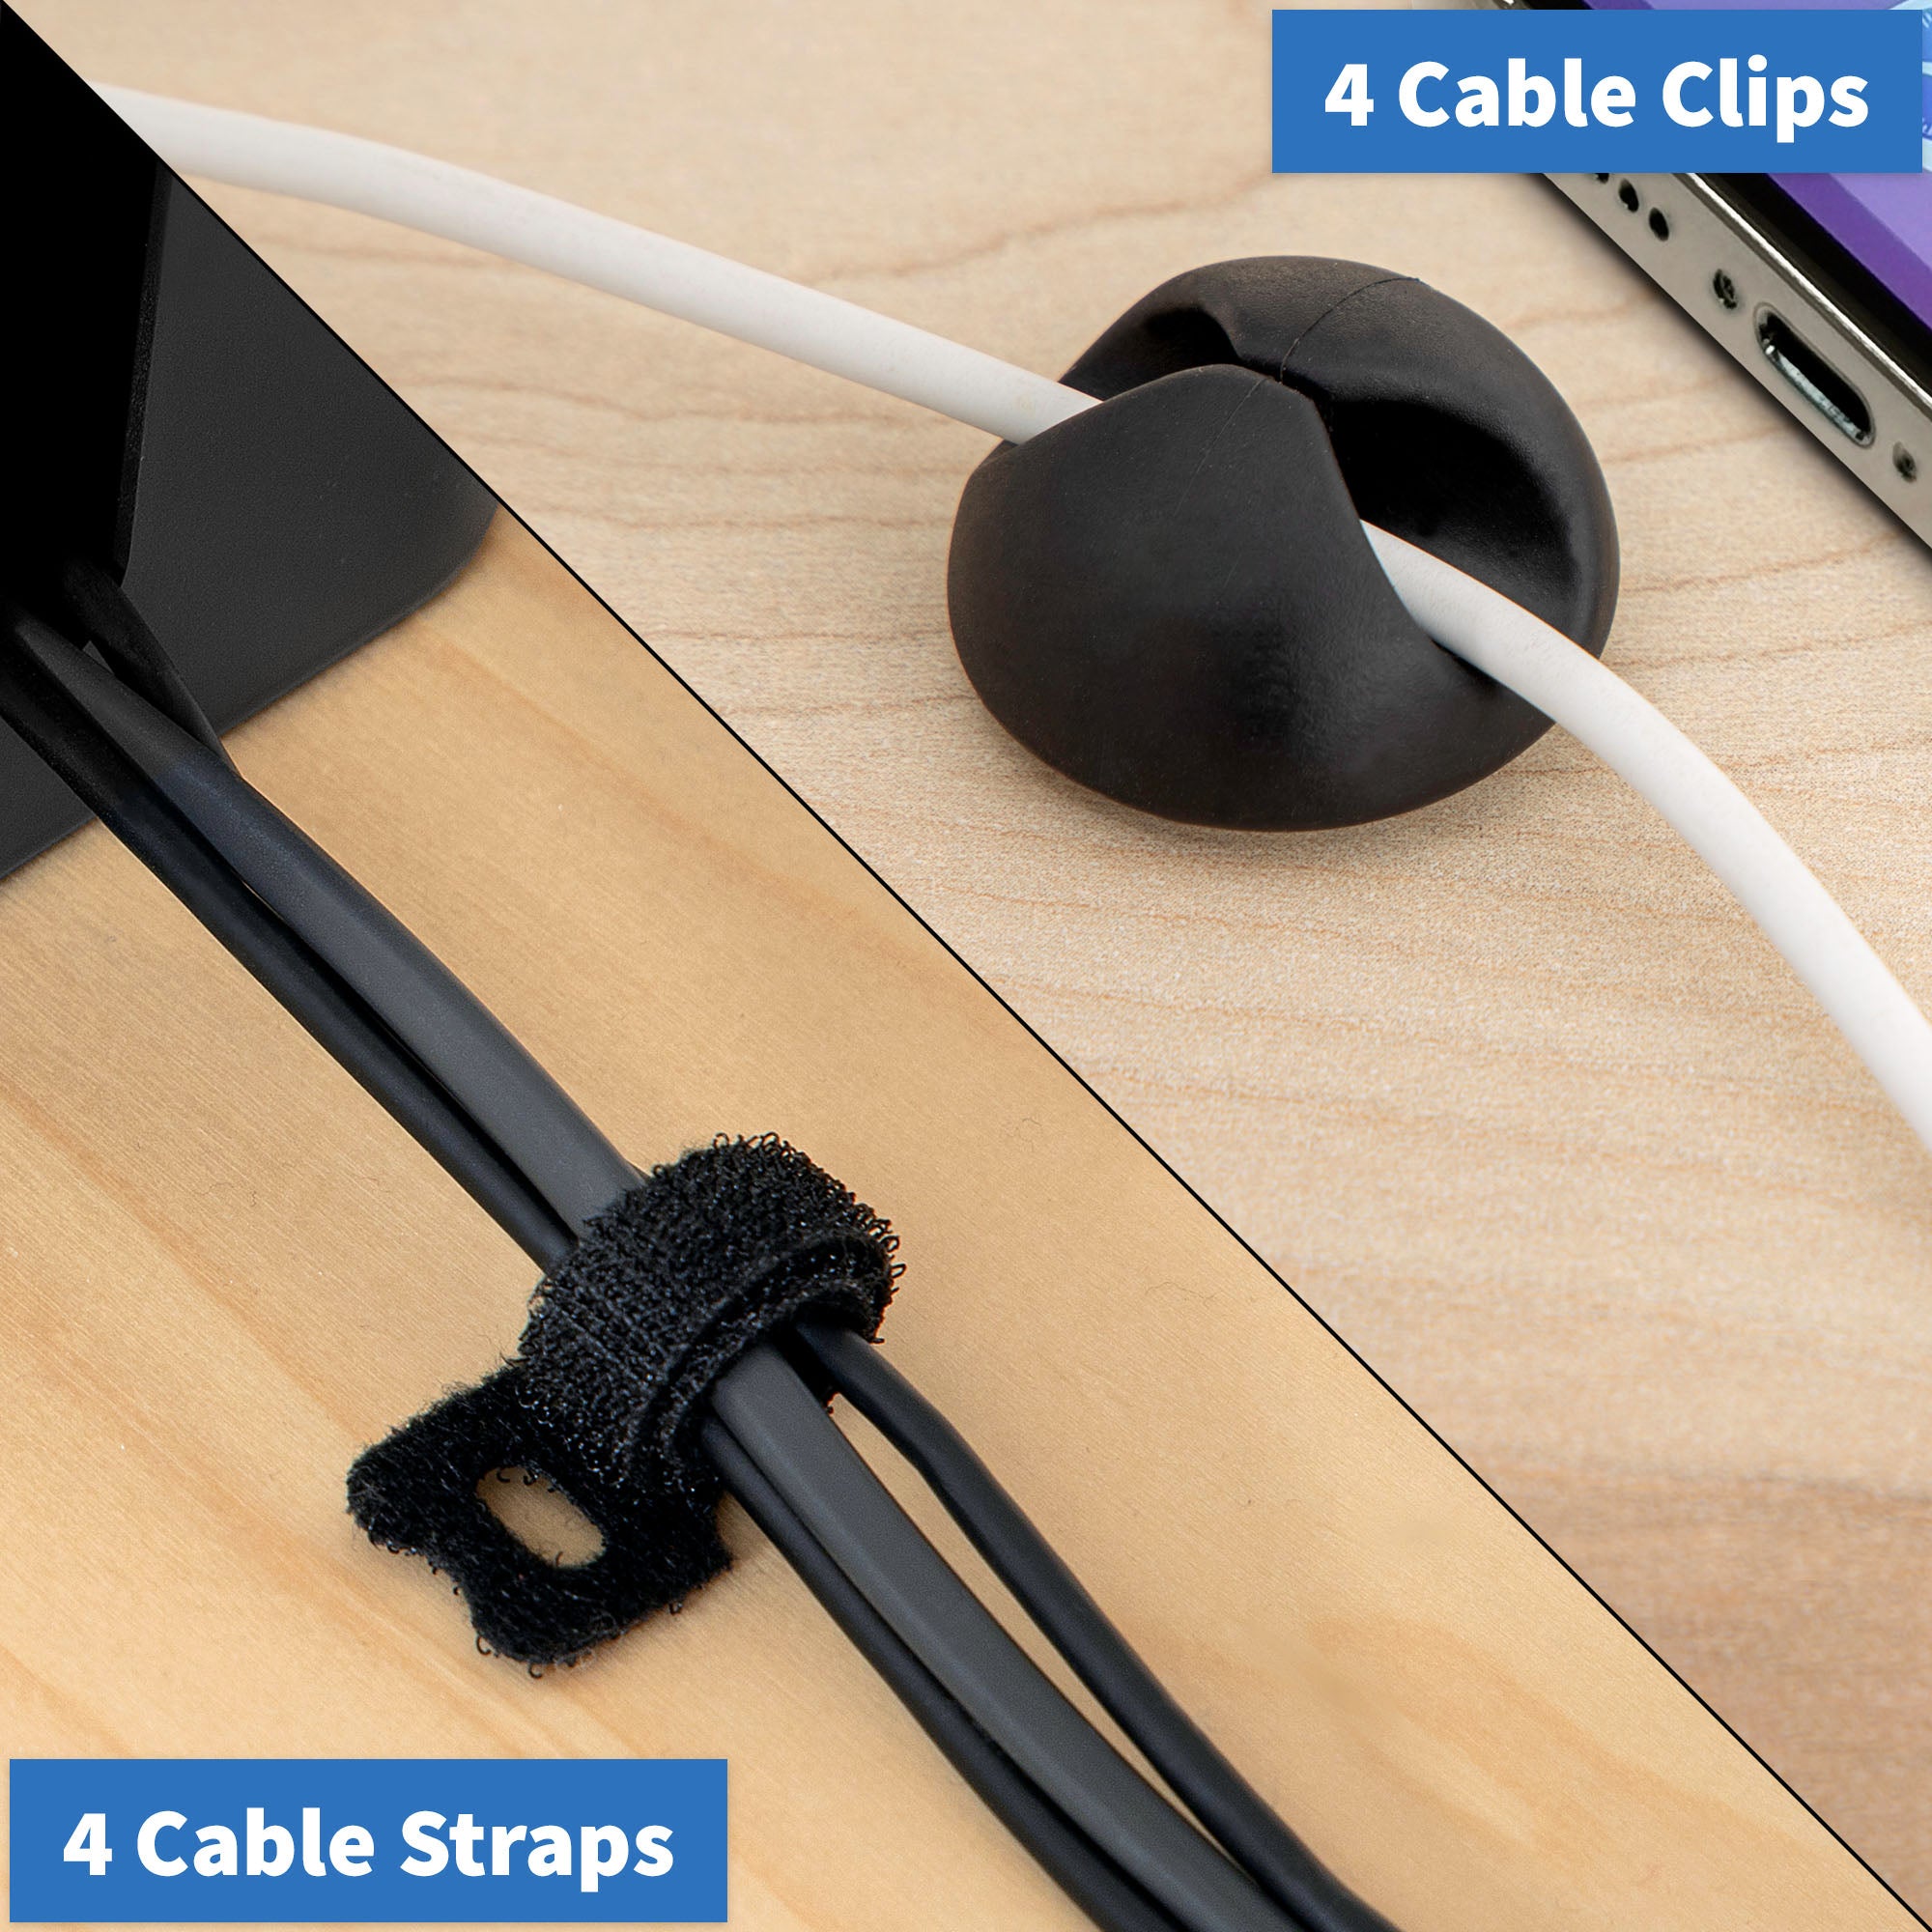 Cable Management Box - Hide Cords Home Organizer Tool, Power Strip Cover,  Baby Proof & Pets Electric Concealer - Wire Cord Outlet Surge Protector